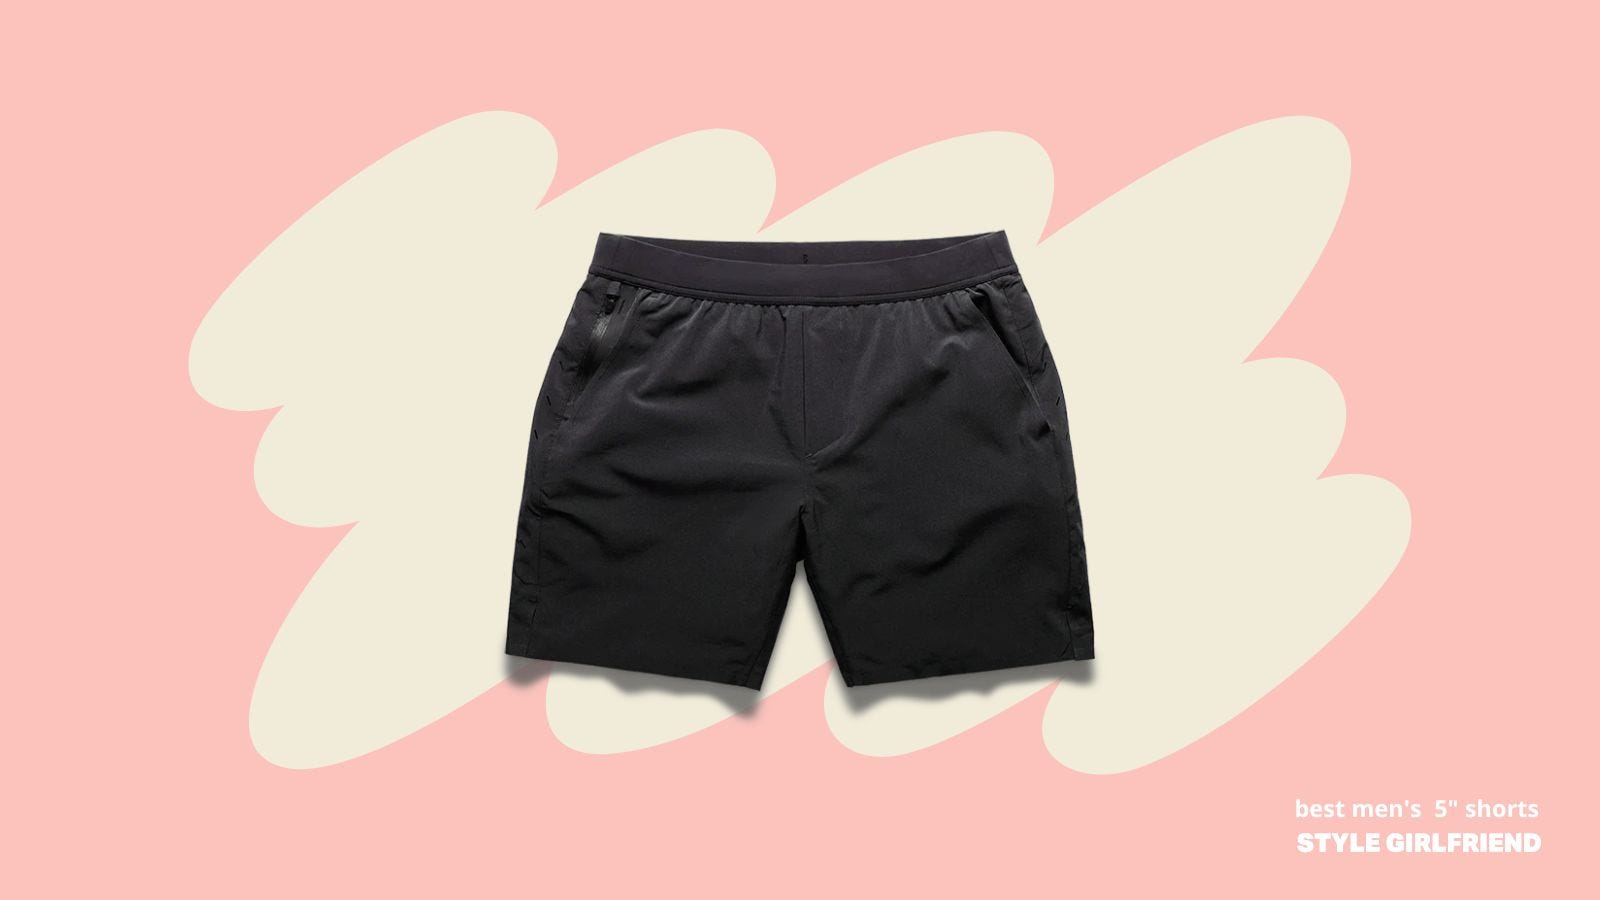 flatlay image of black technical shorts against a pink background